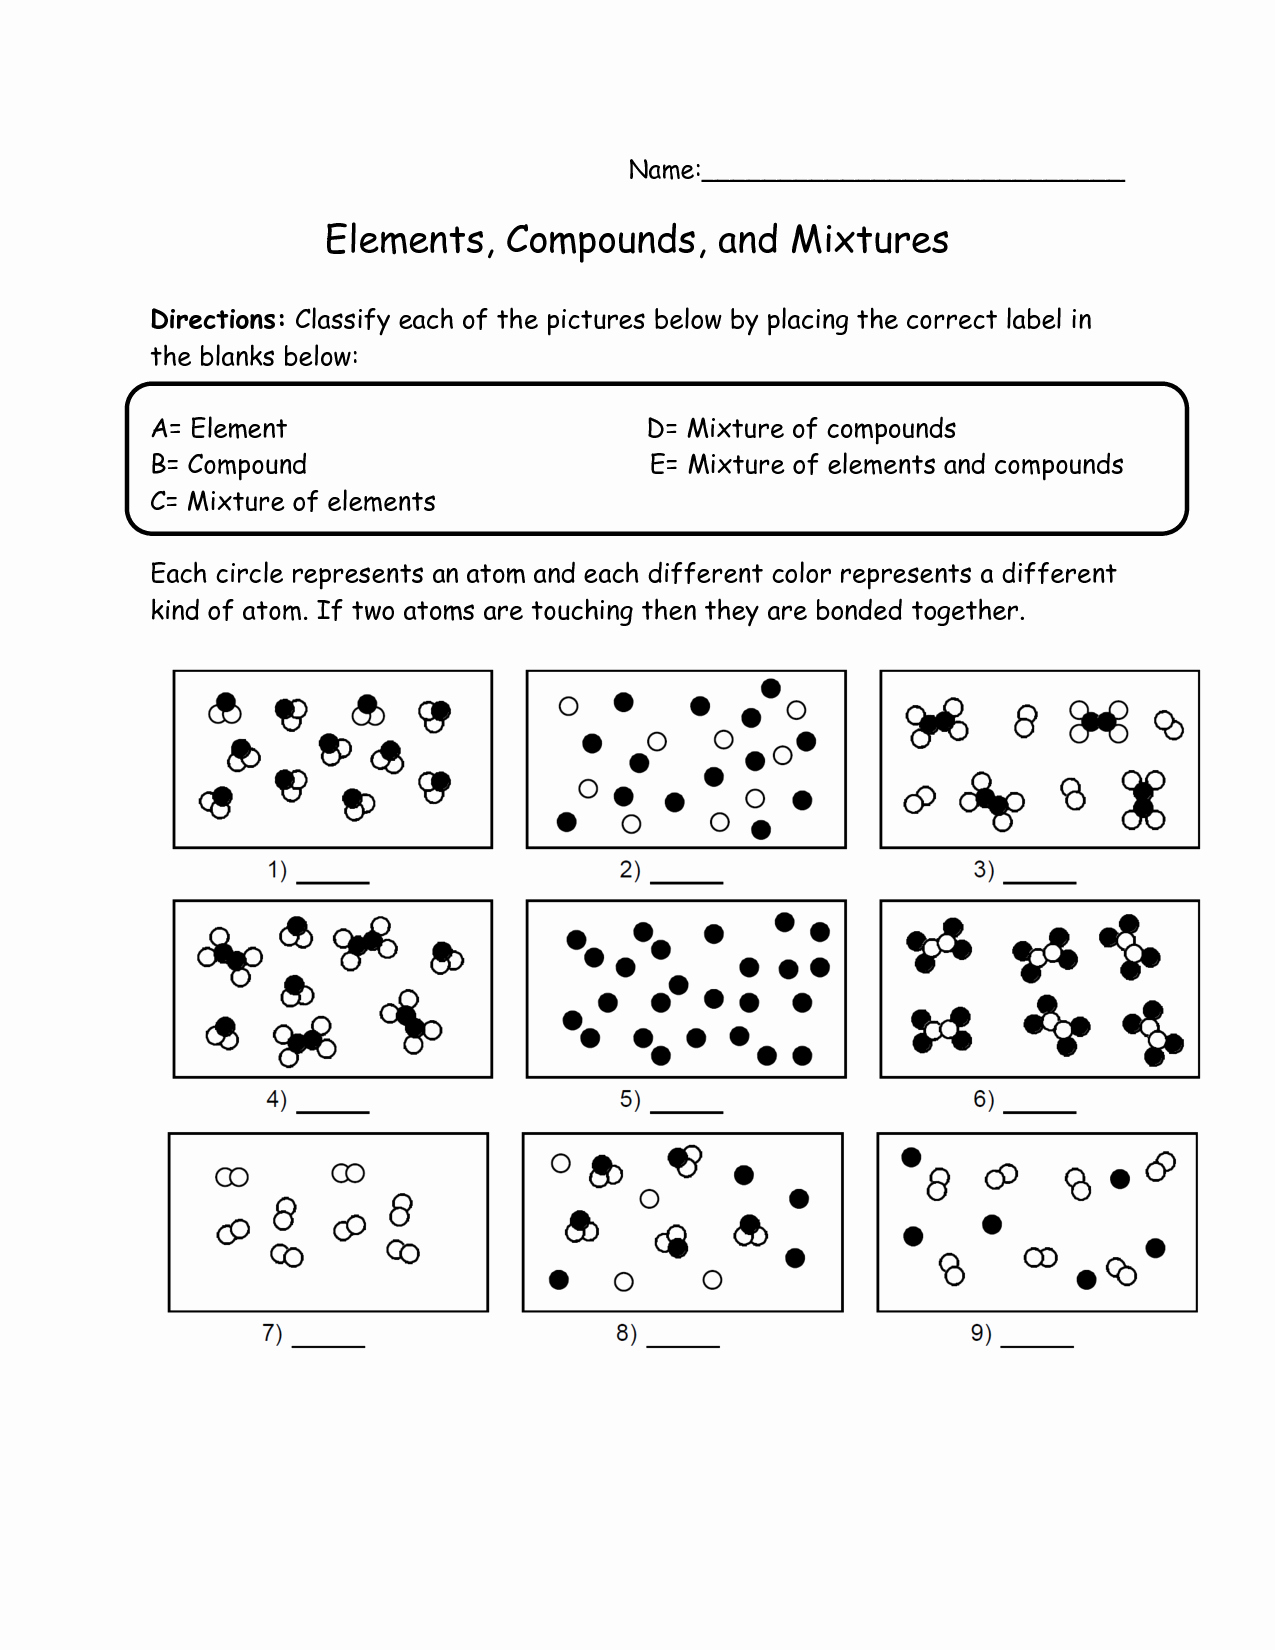 Elements and Compounds Worksheet Awesome Friday May 12 2017 Shell Lake Science Grade 7